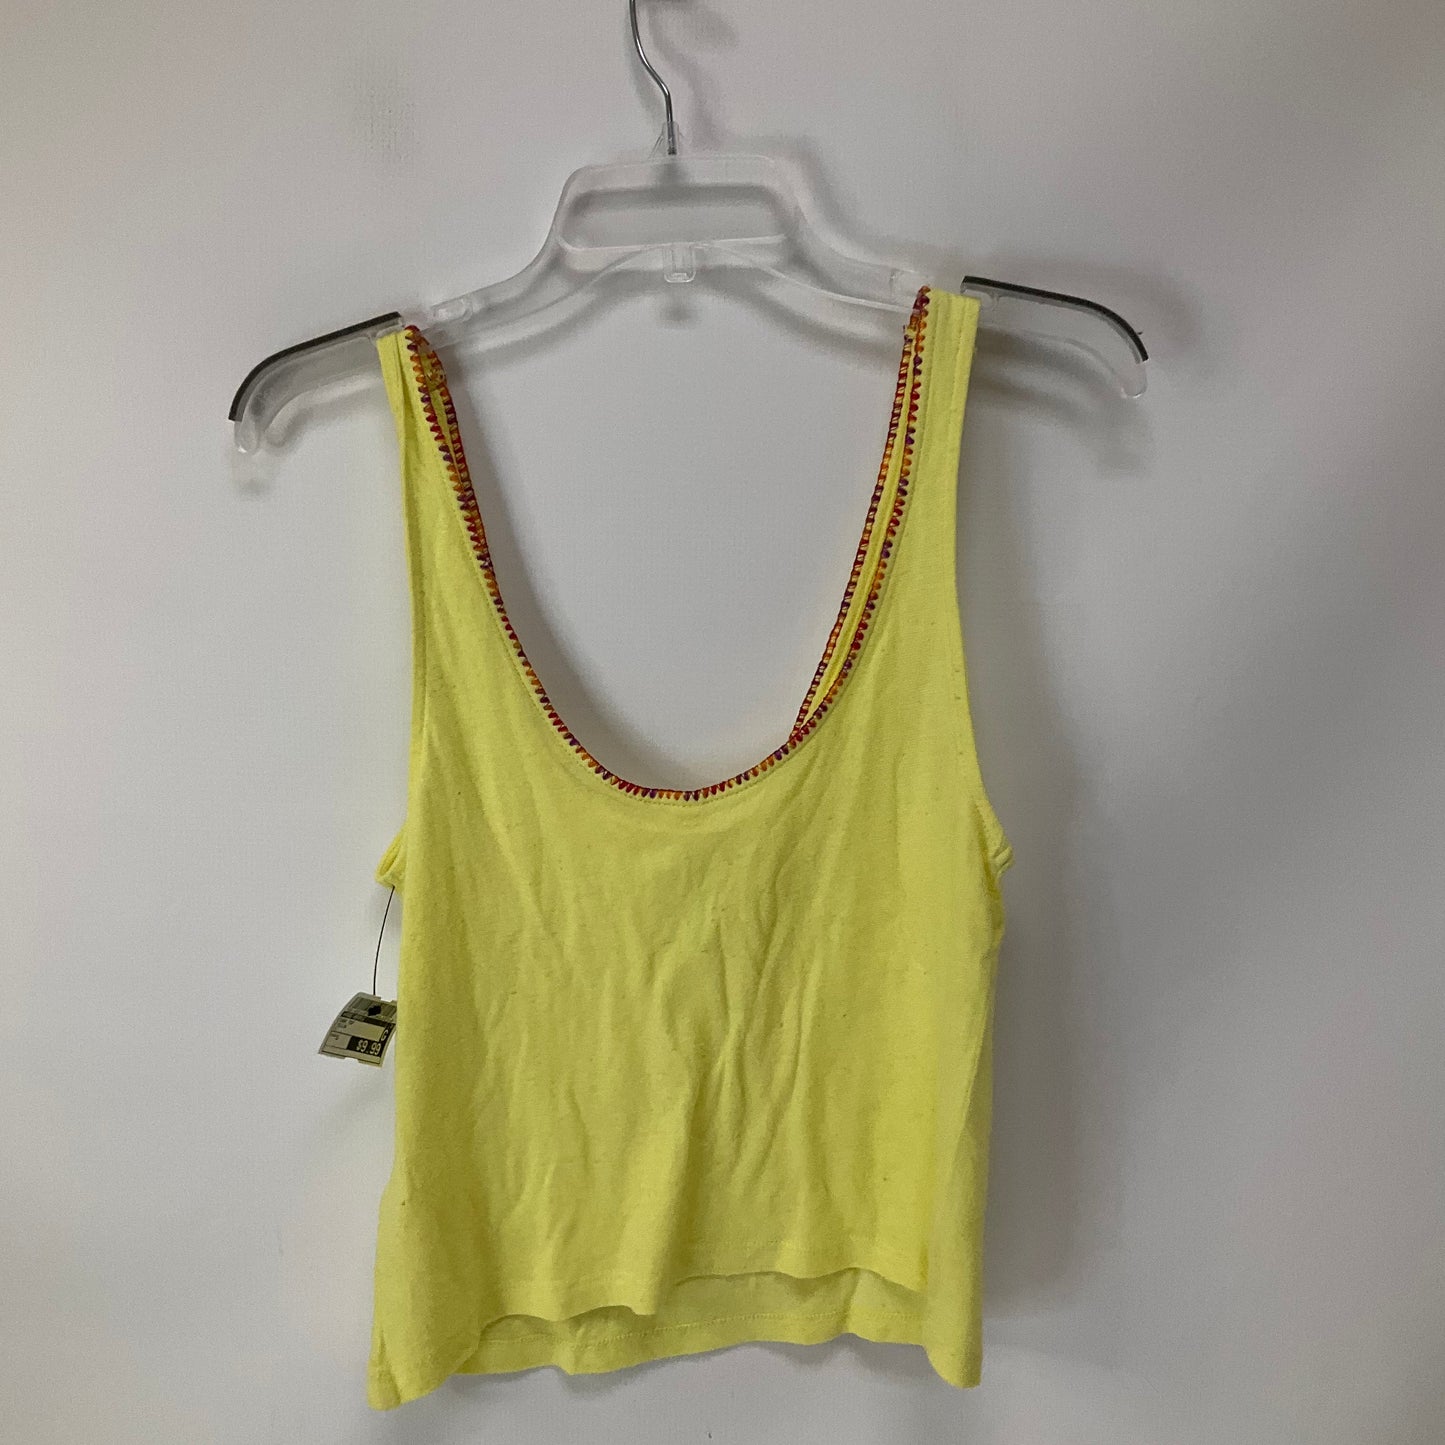 Yellow Tank Top Free People, Size S